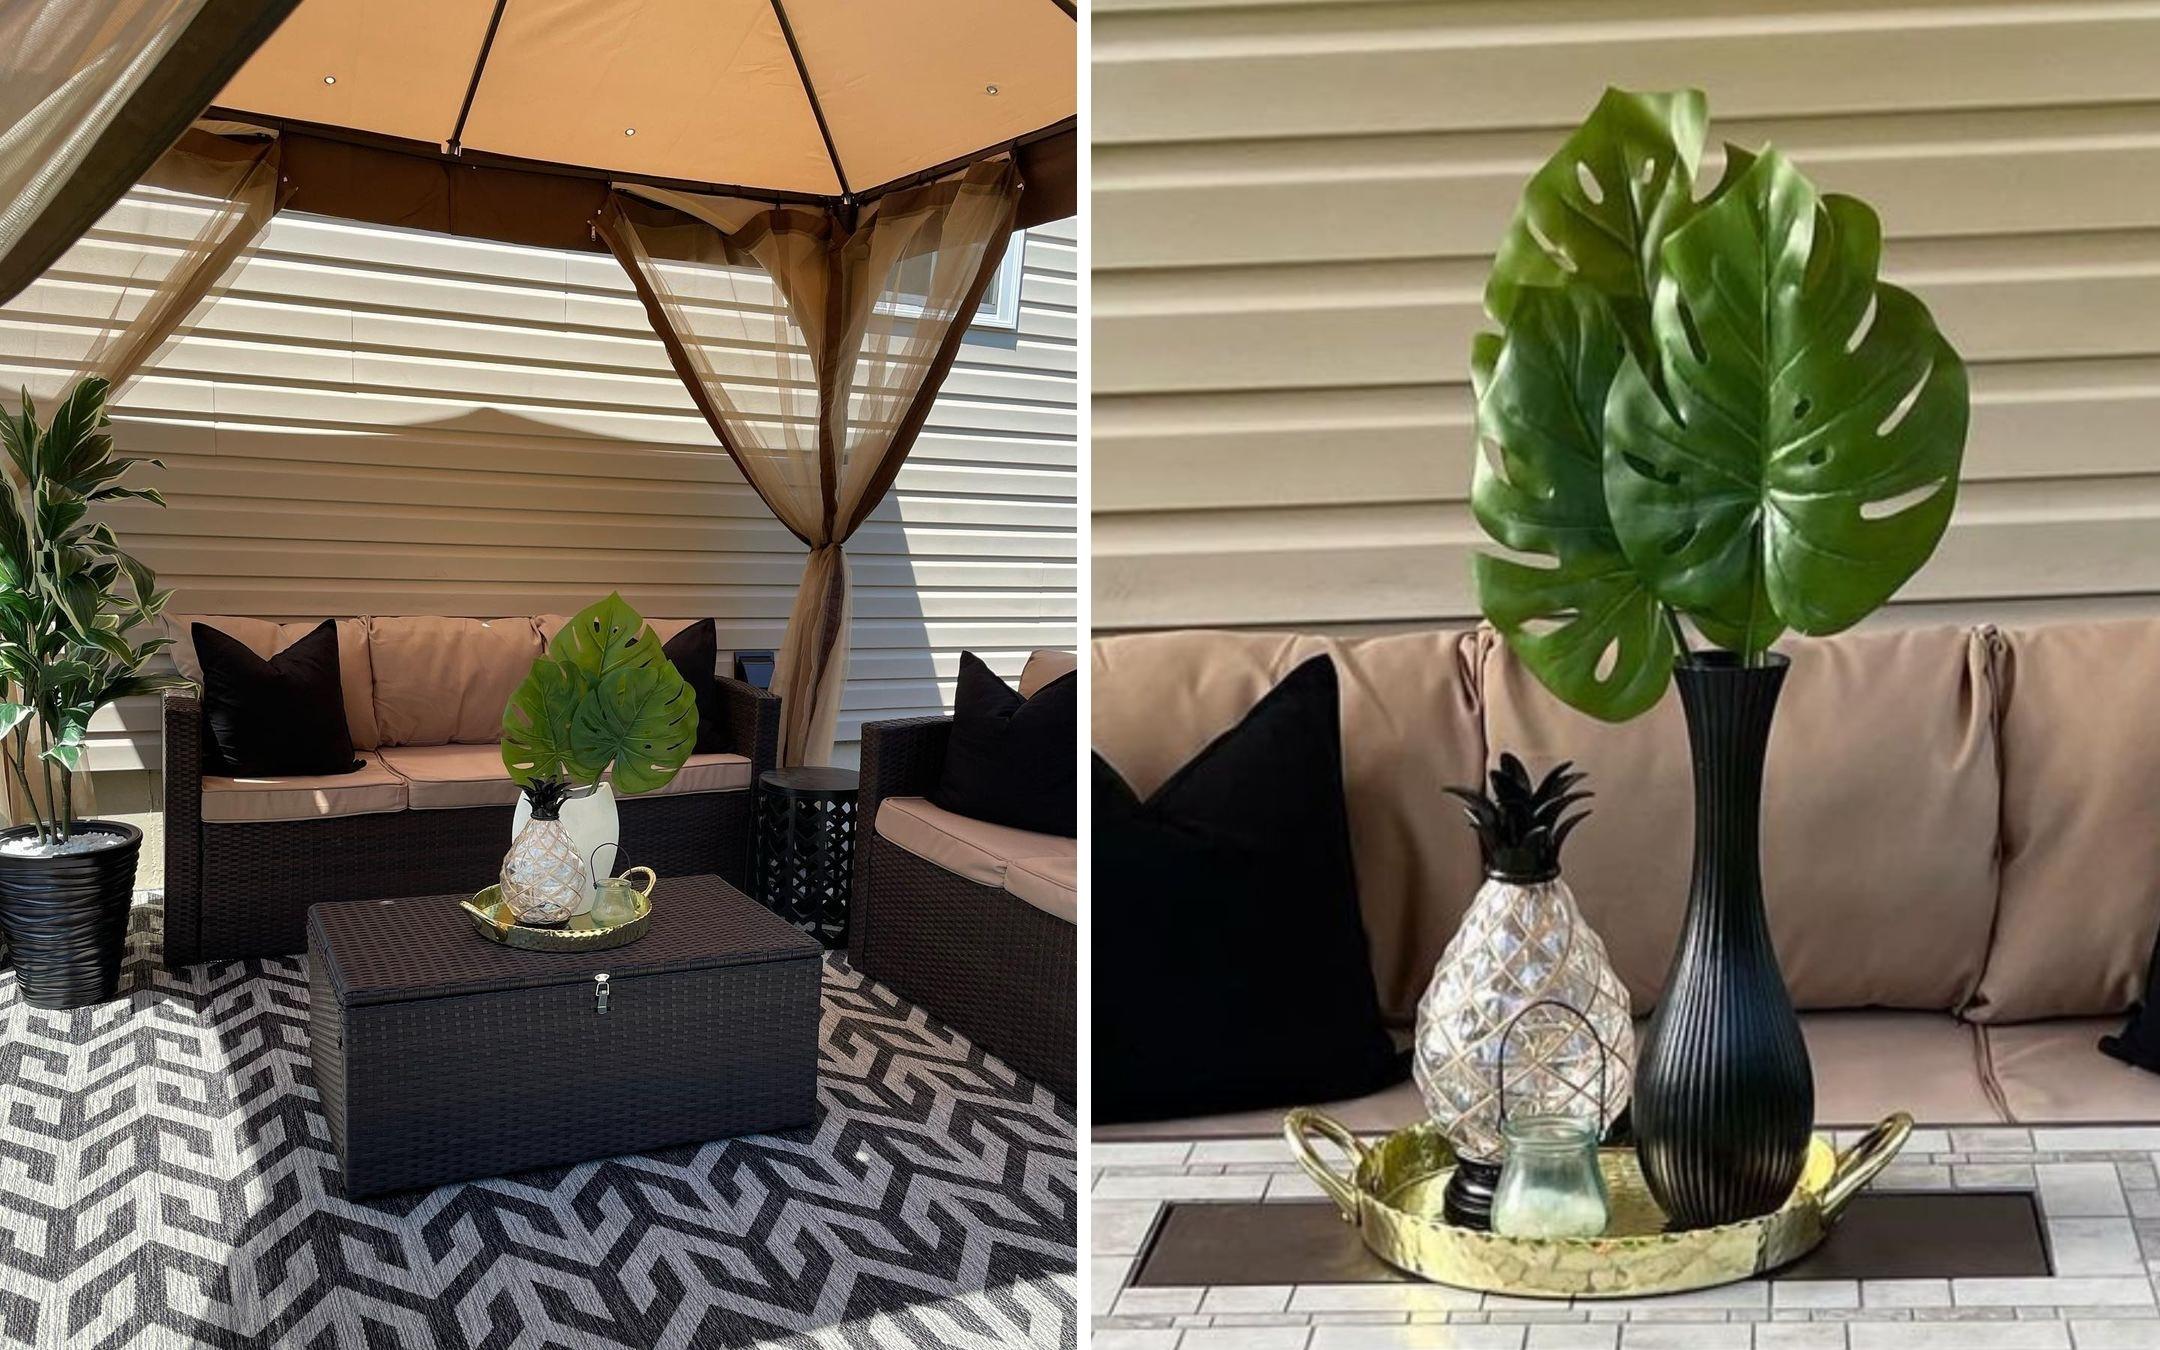 Donice’s outdoor living room gets a personal touch and a homey feel with the addition of plants, decorative accents, lighting, and a rug. 